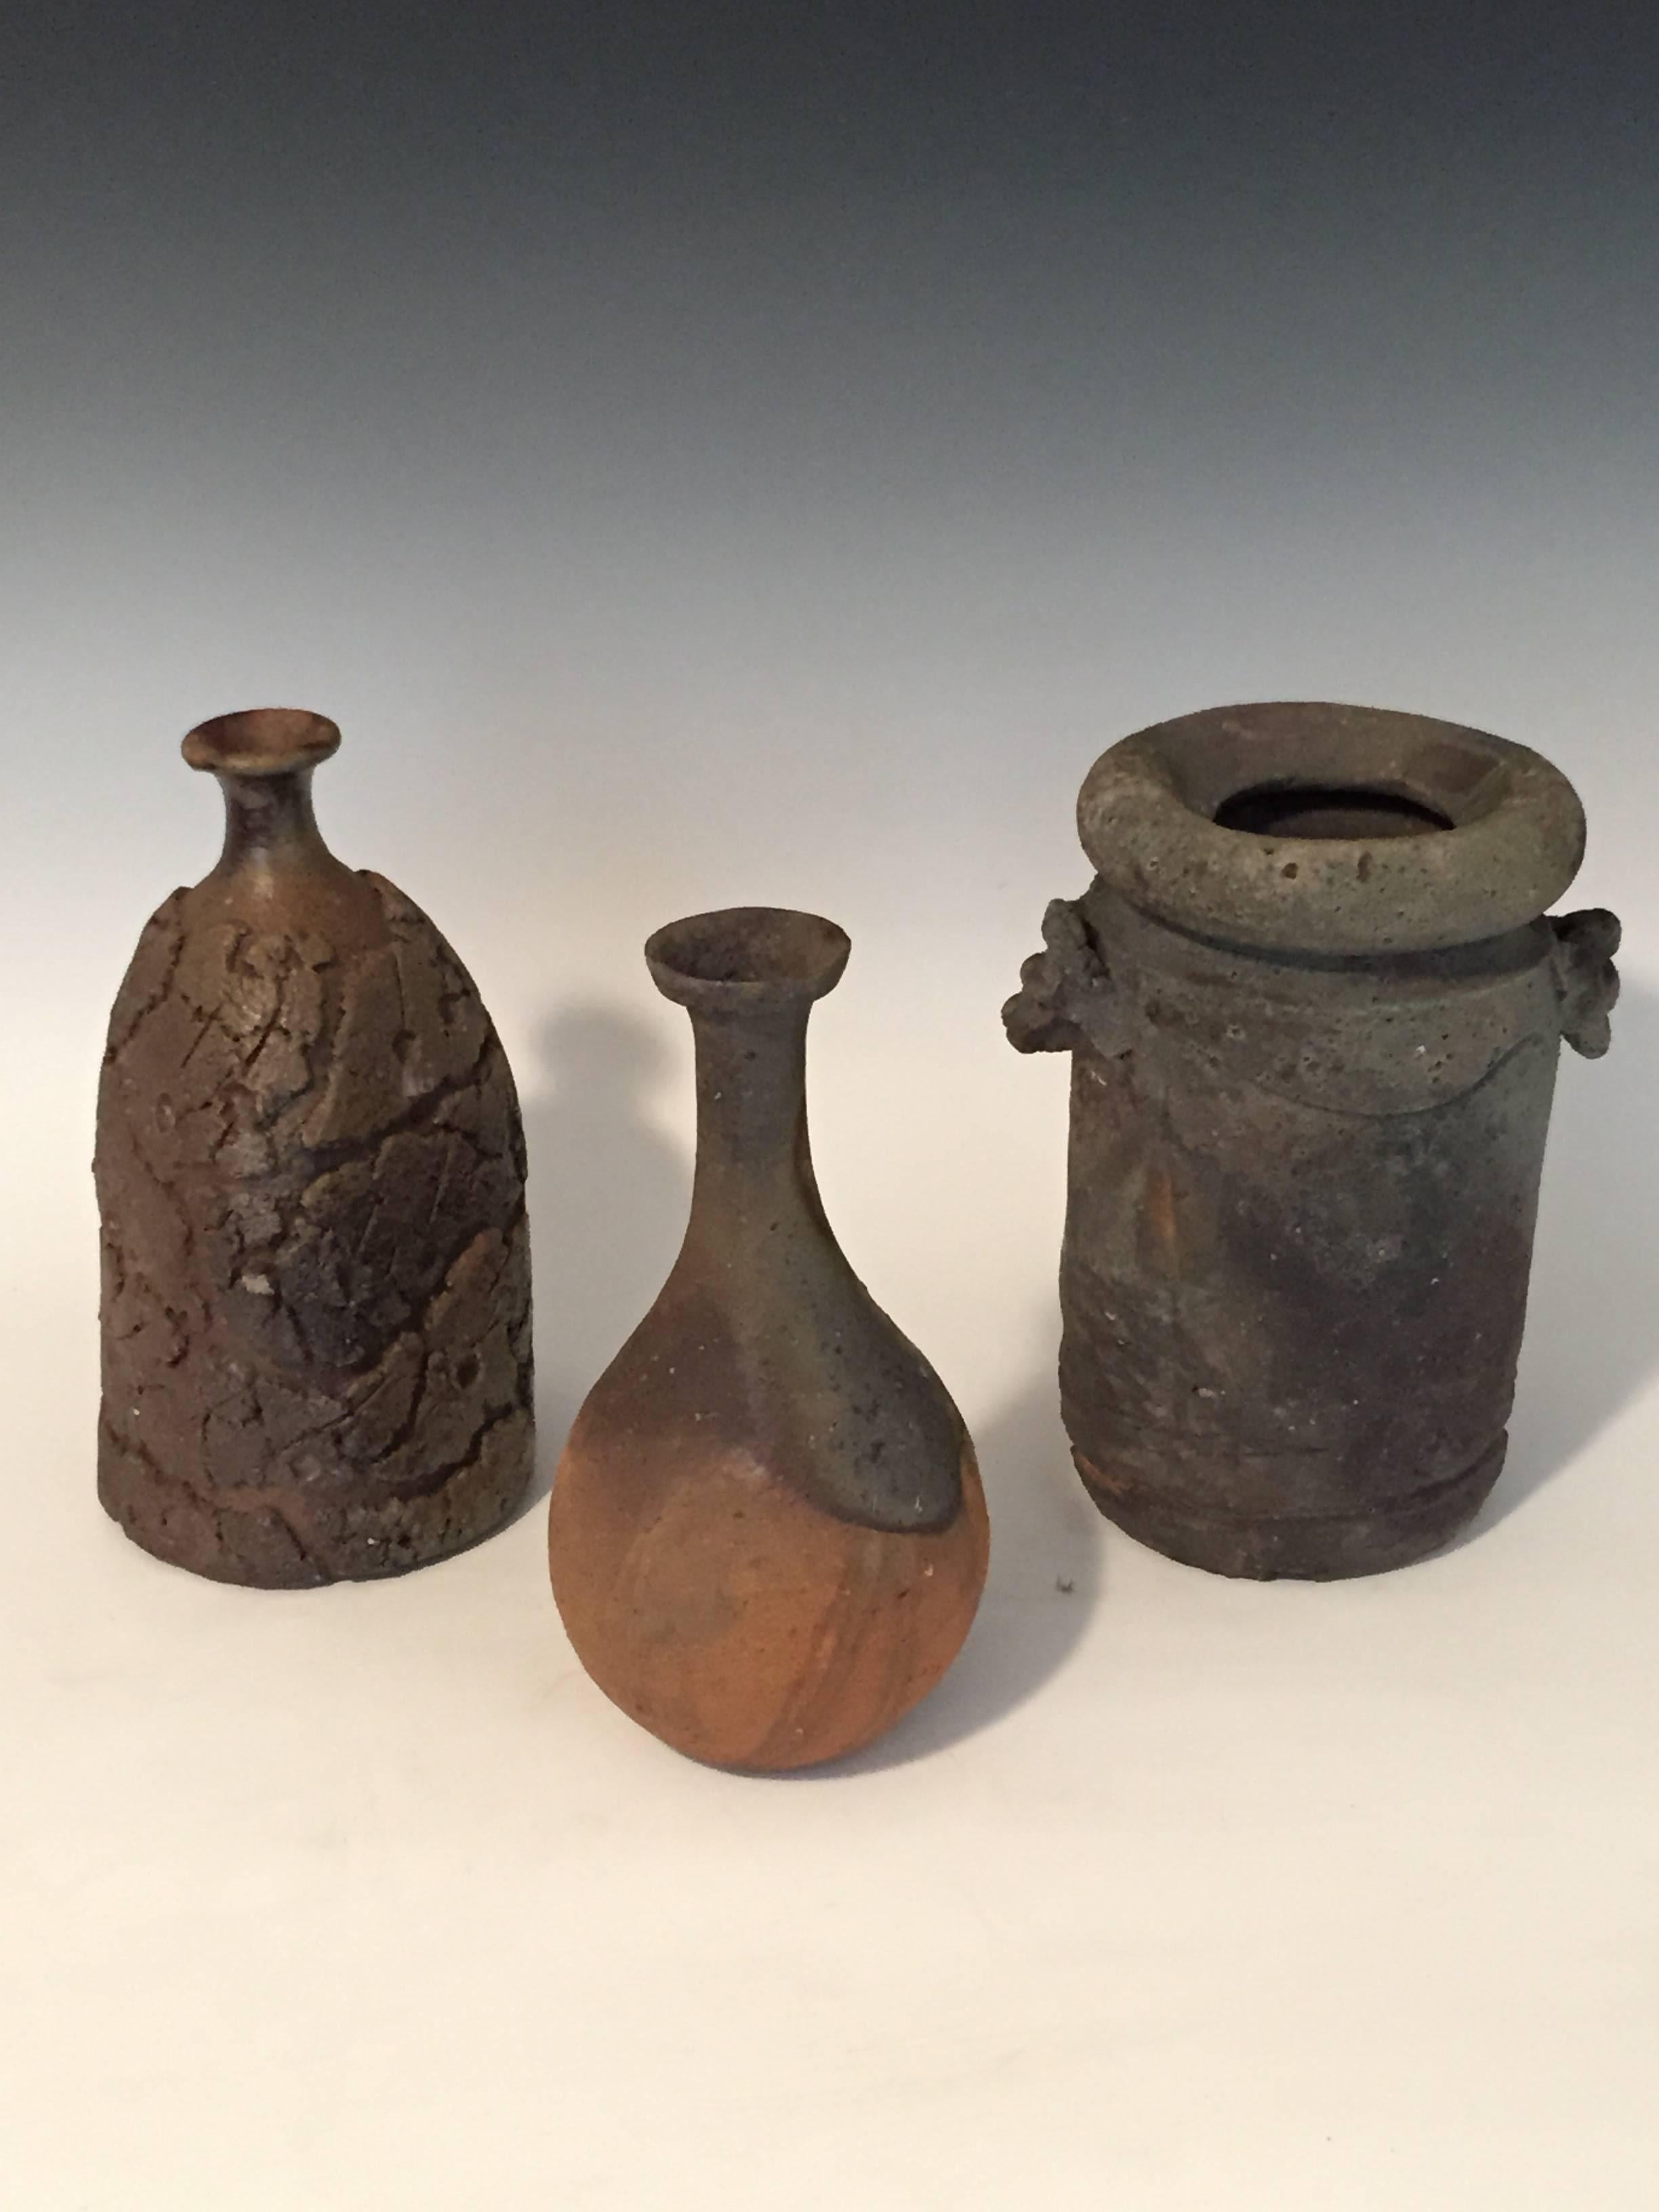 Three beautiful handcrafted ceramic vases by well respected Japanese potter Harada Shuroku (b.1941 - ).
The wood firing results in bringing out the organic color effects that are the gift of the unknown.
All three pieces come with individual